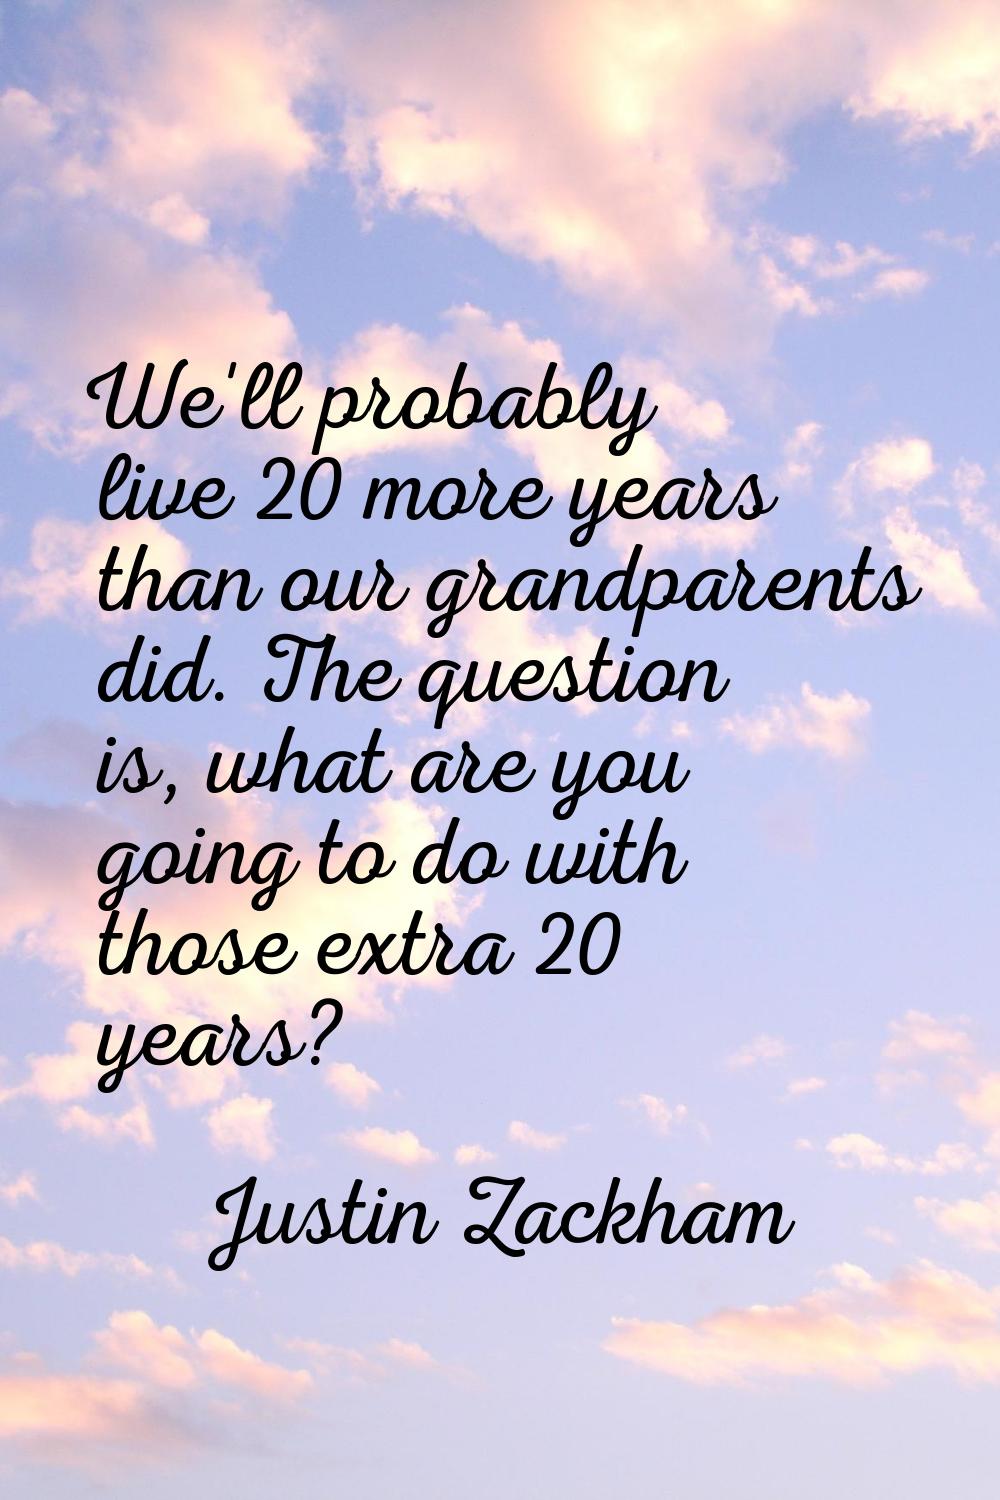 We'll probably live 20 more years than our grandparents did. The question is, what are you going to